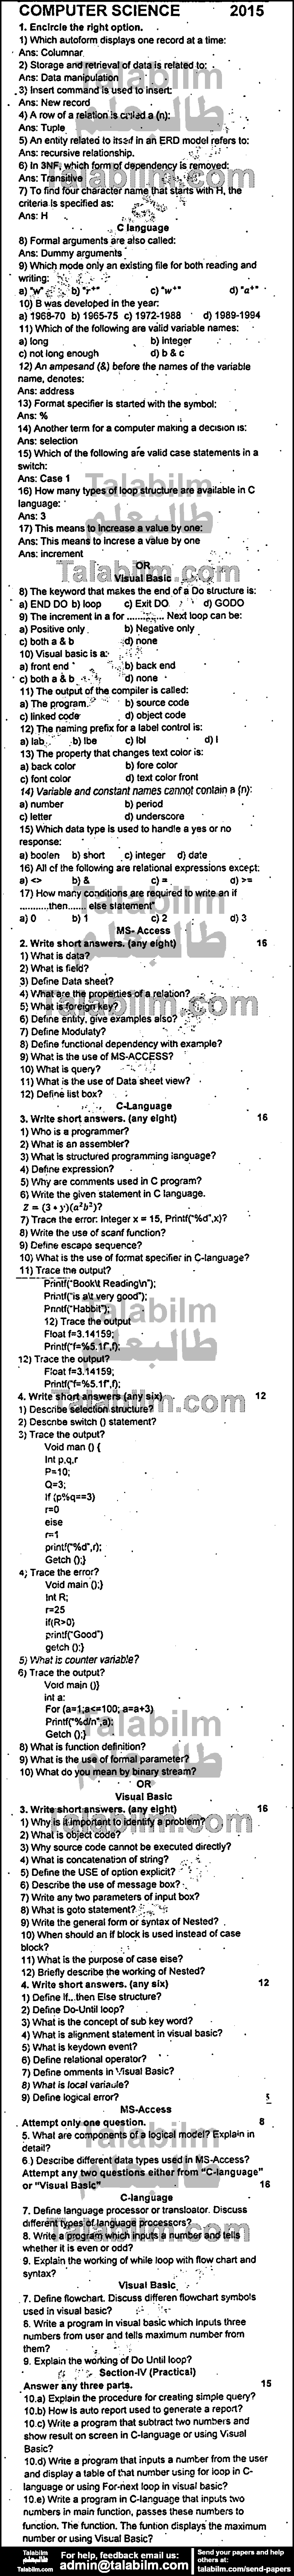 Computer Science 0 past paper for Group-I 2015